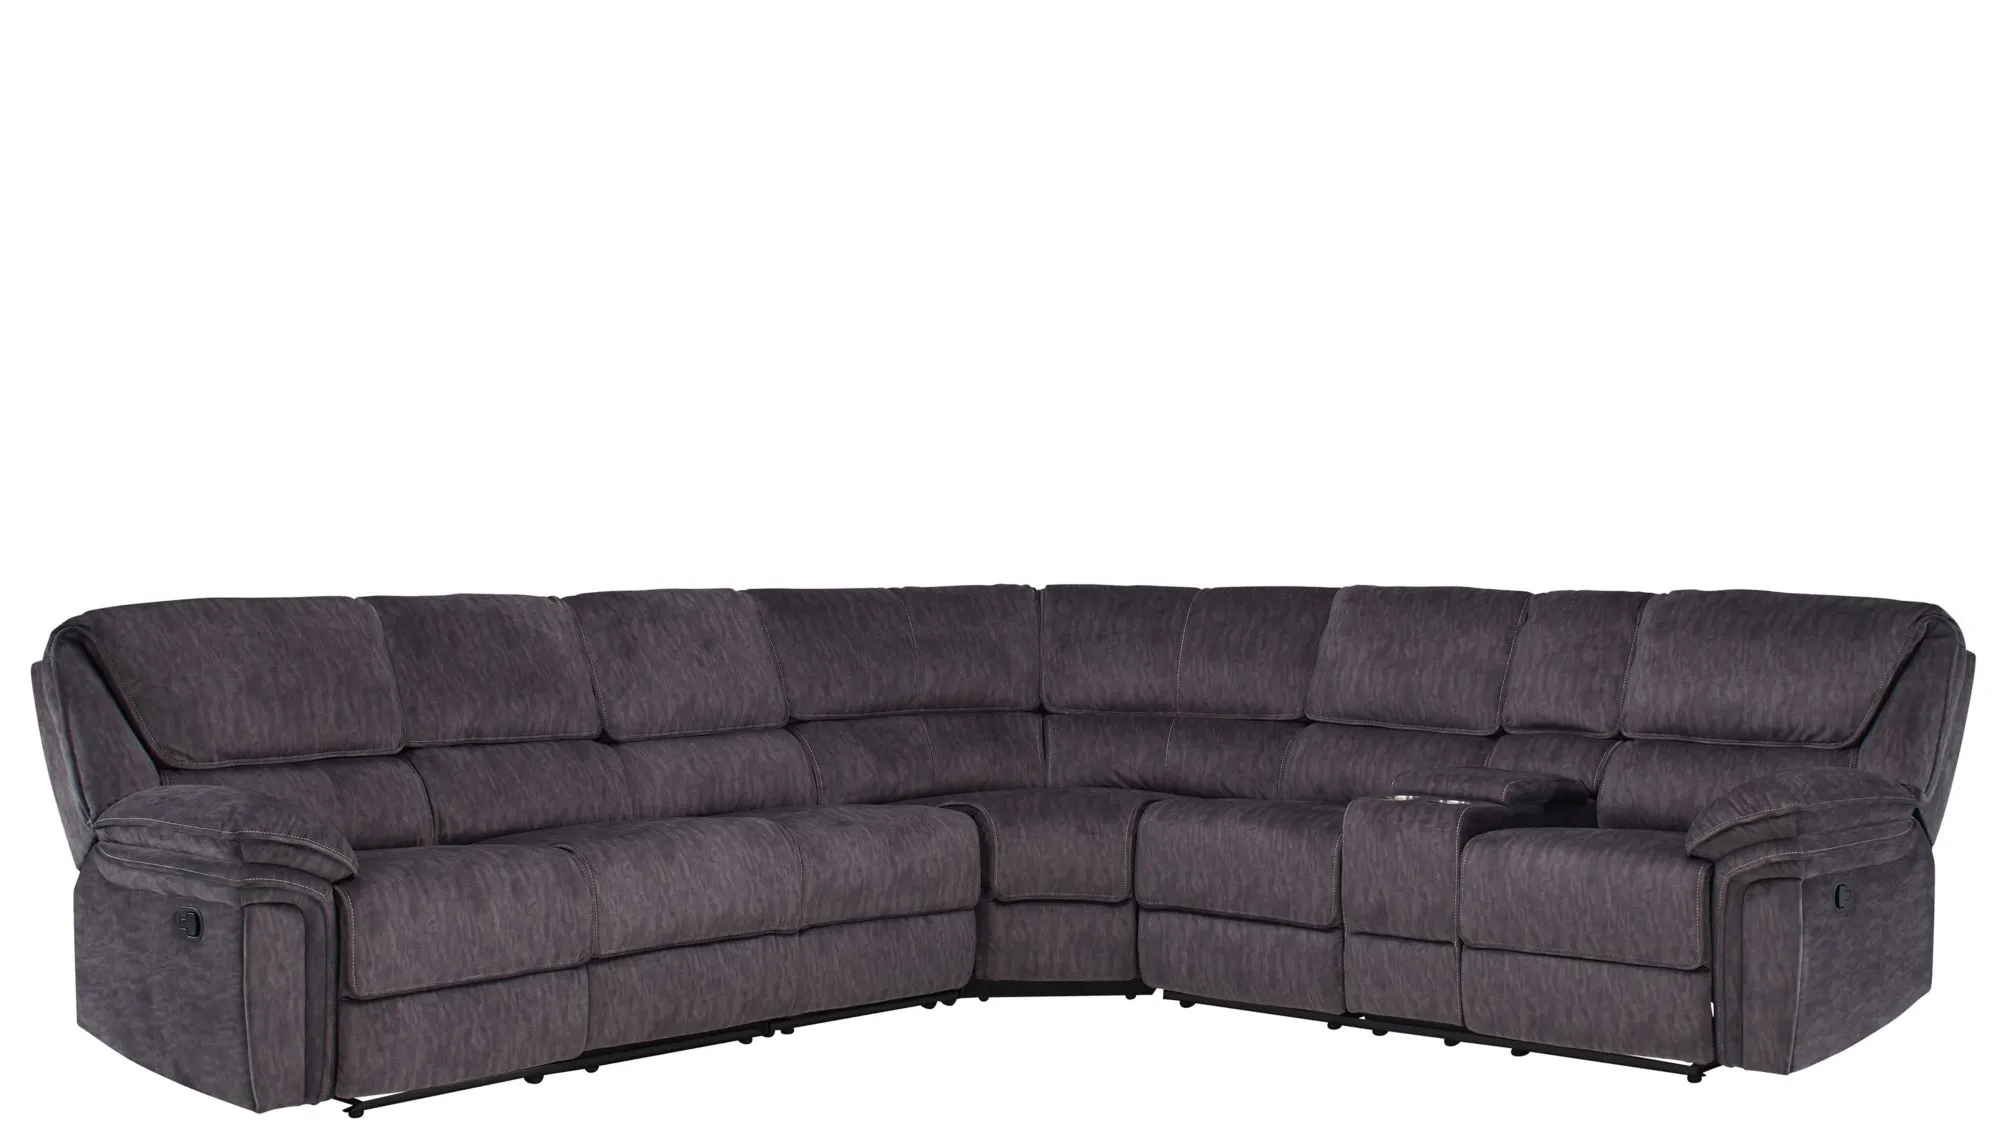 Portman 4-pc. Reclining Sectional in Smoke Gray by Bellanest